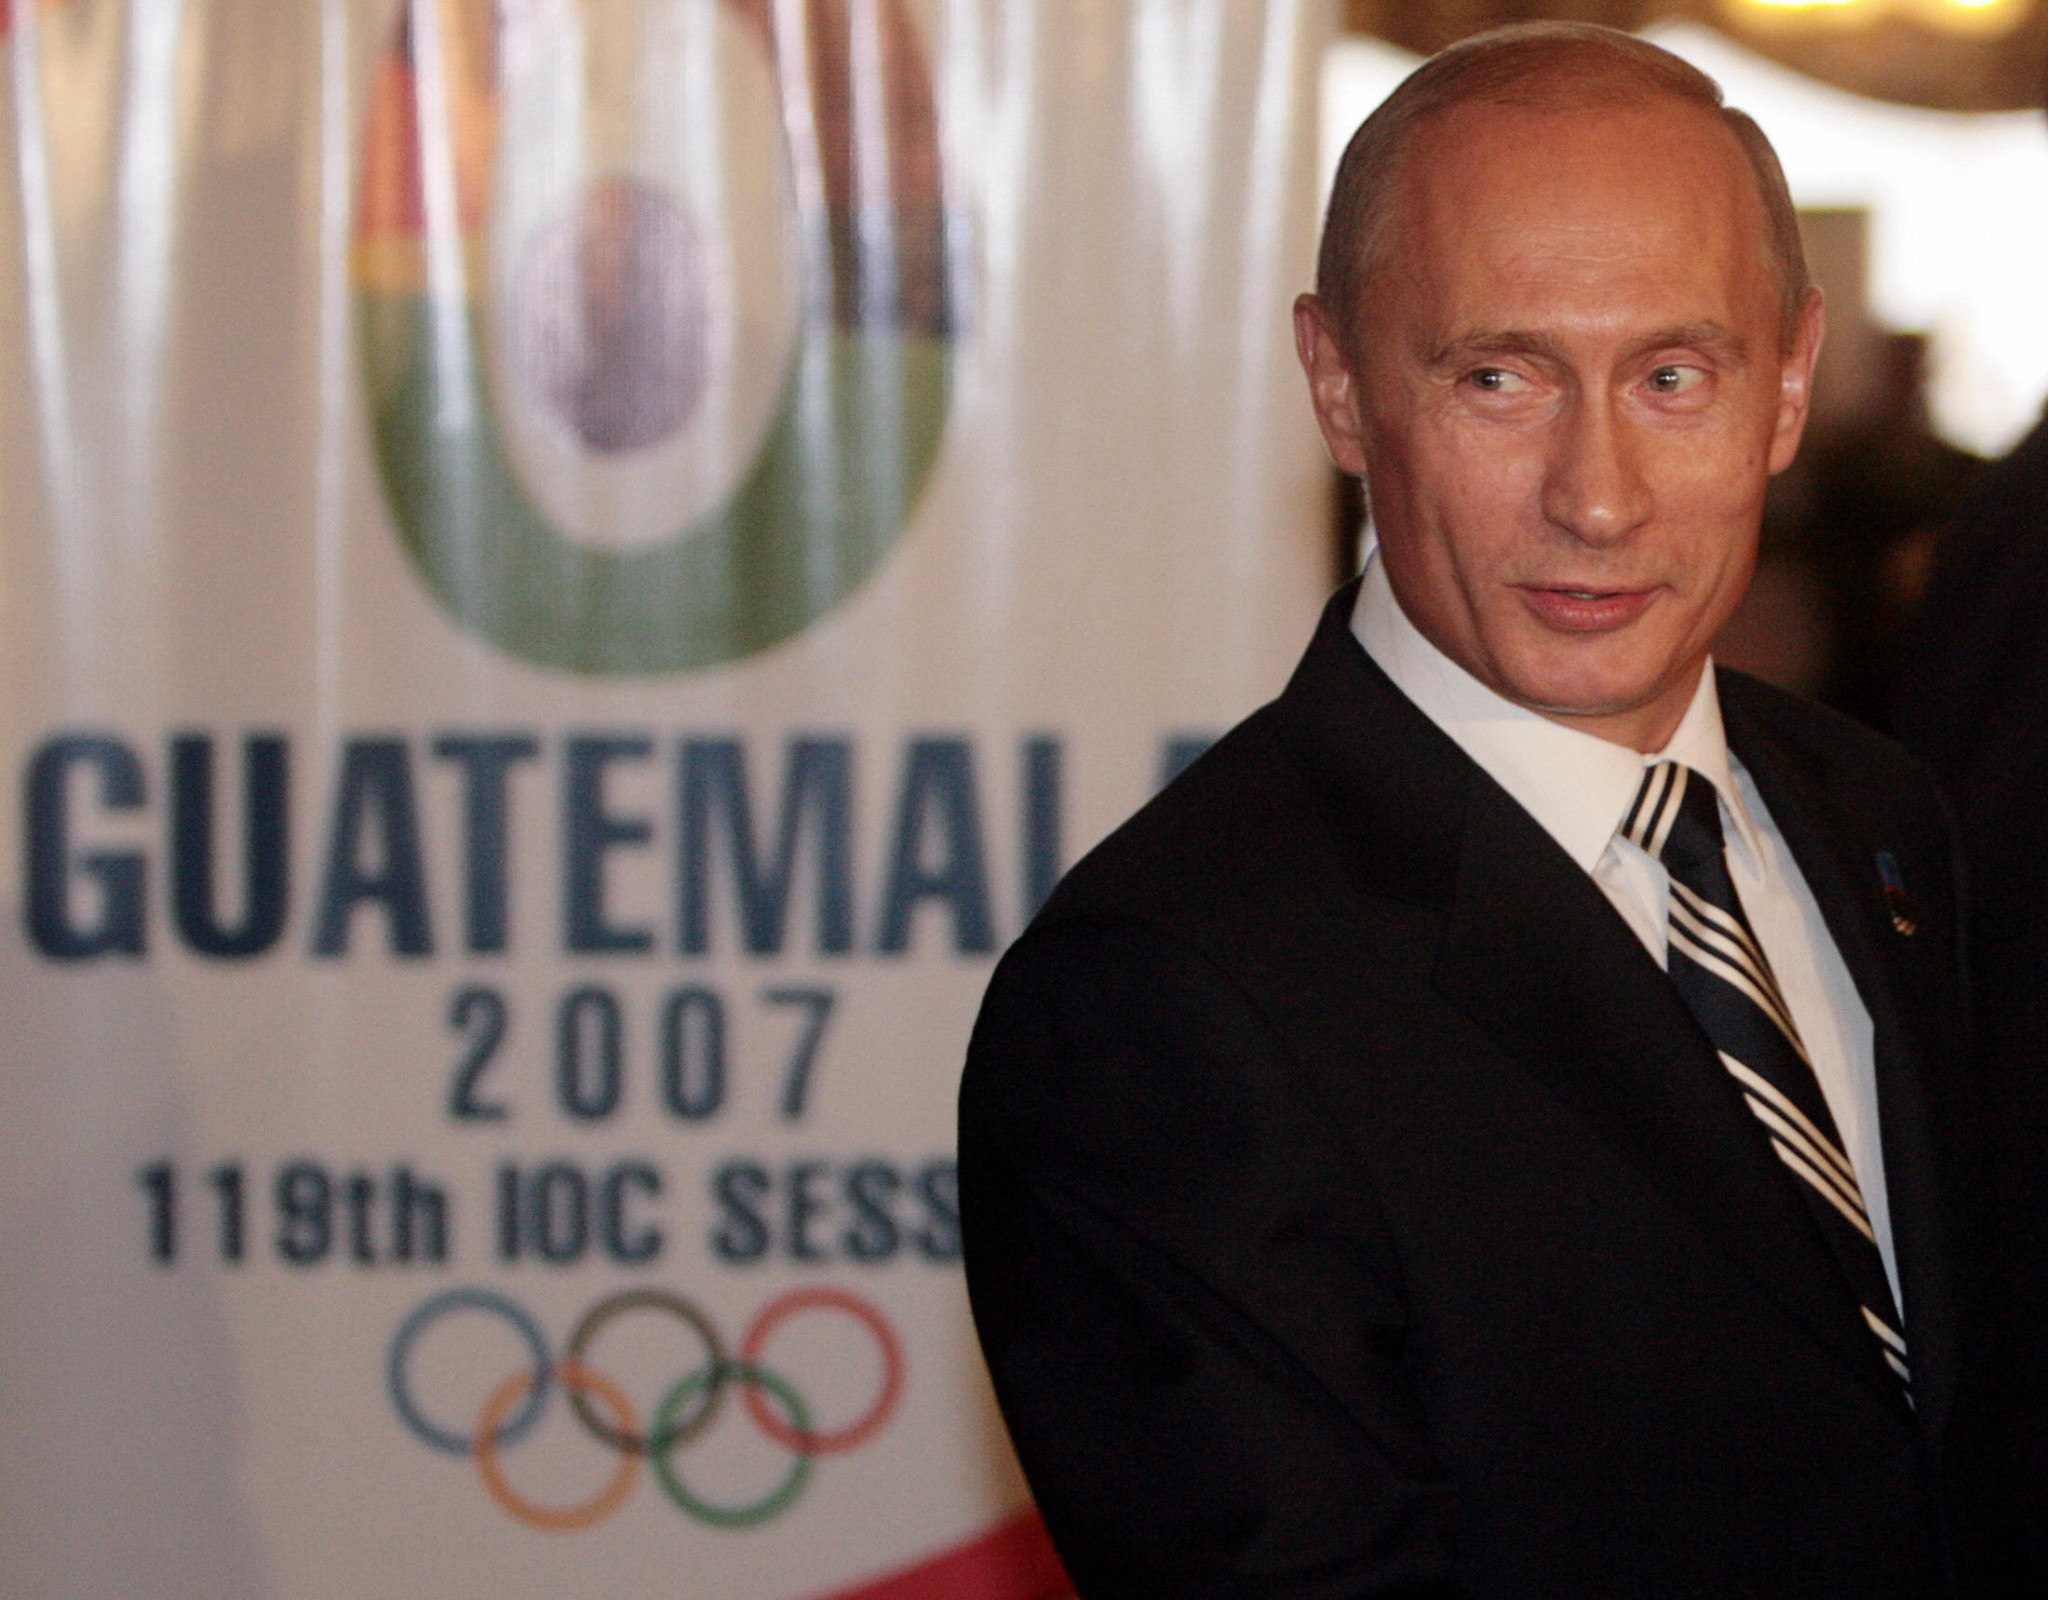 At the IOC Session in Guatemala in 2007, Vladimir Putin addressed members in English to help Sochi pull off an unlikely victory to host the 2014 Olympic Games ©Getty Images